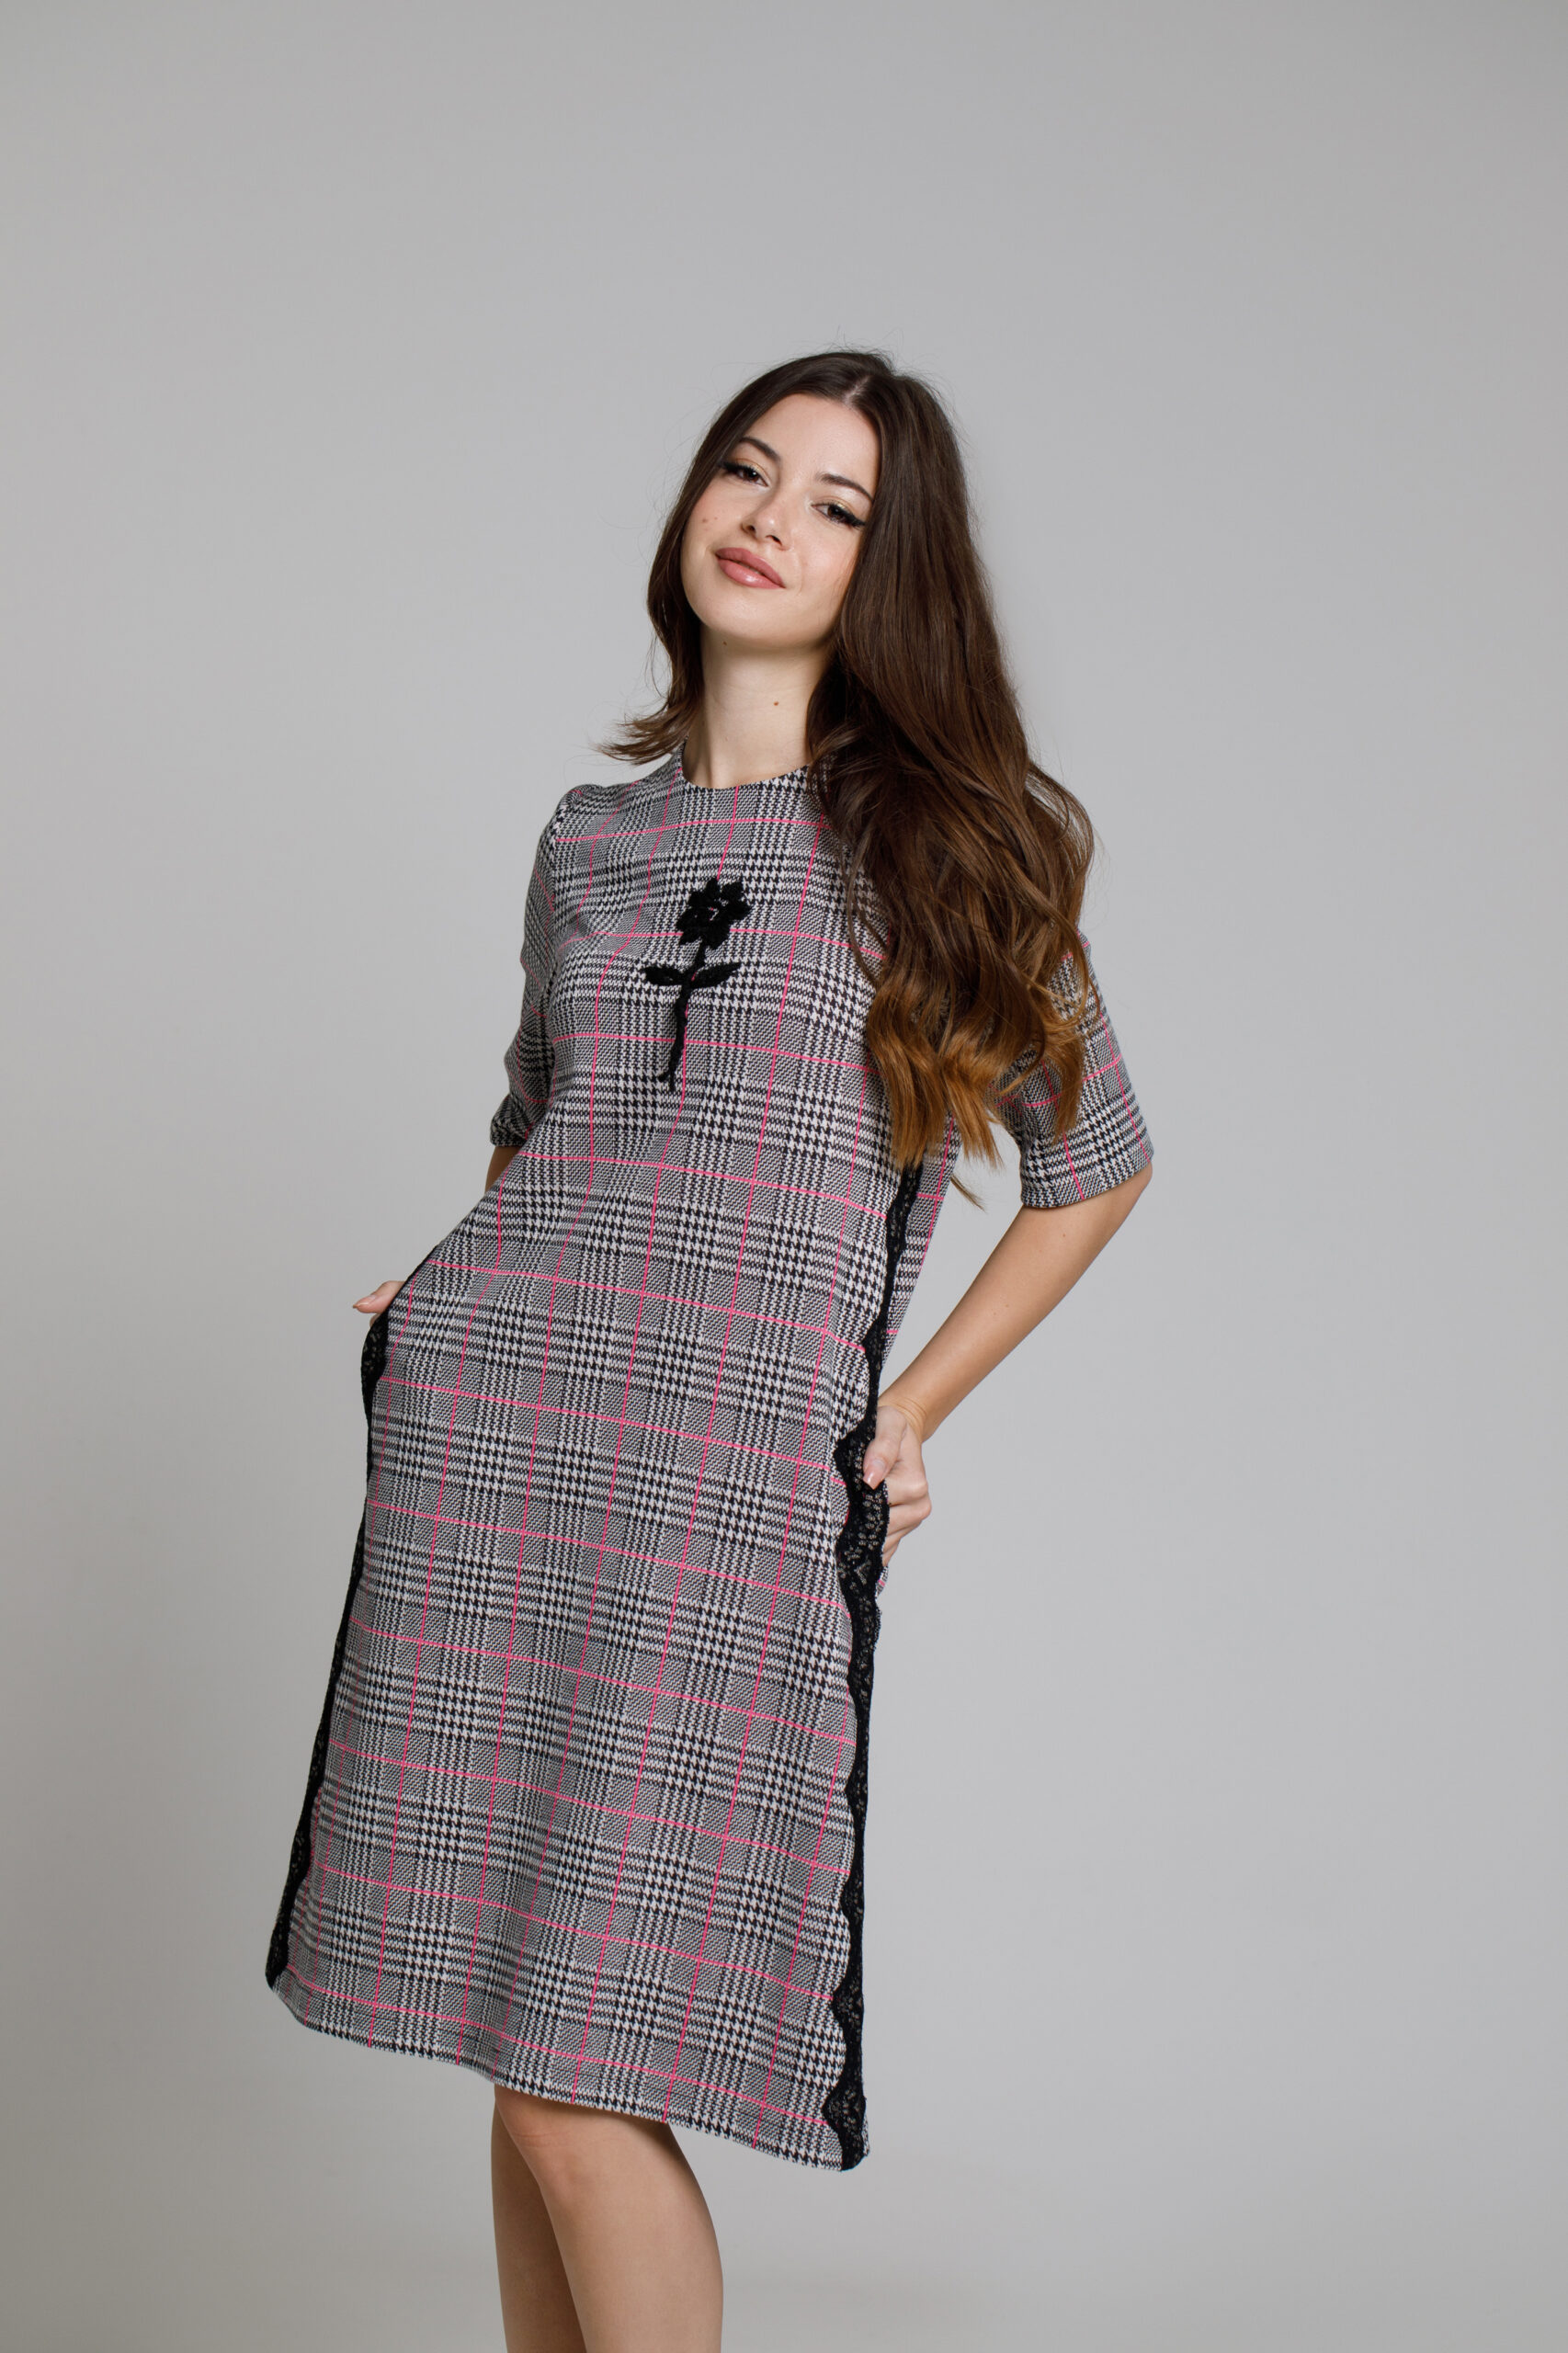 ARELLA dress in check fabric AND PINK STRIPES. Natural fabrics, original design, handmade embroidery